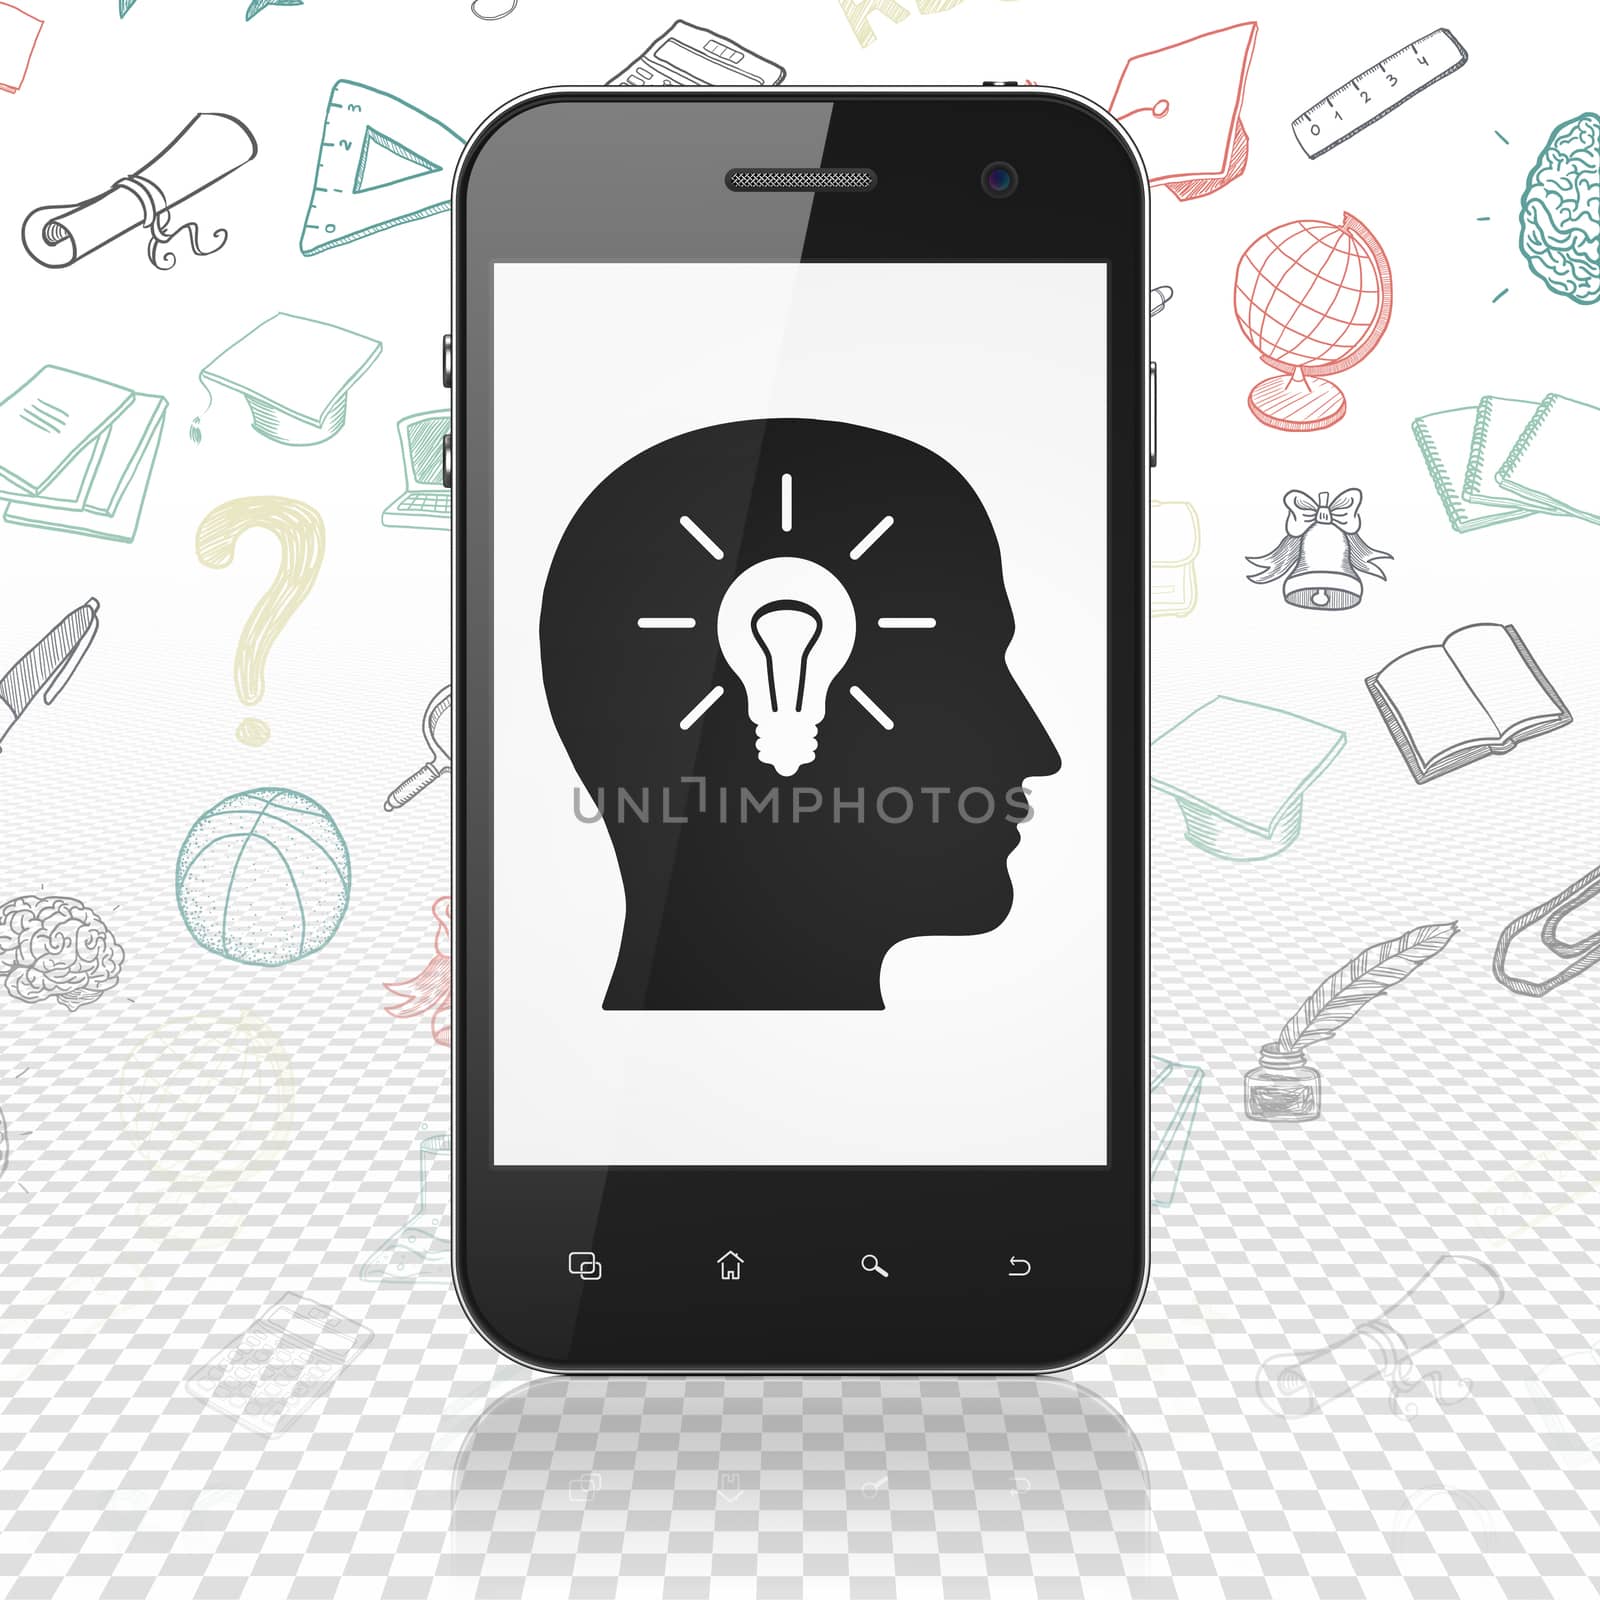 Education concept: Smartphone with  black Head With Light Bulb icon on display,  Hand Drawn Education Icons background